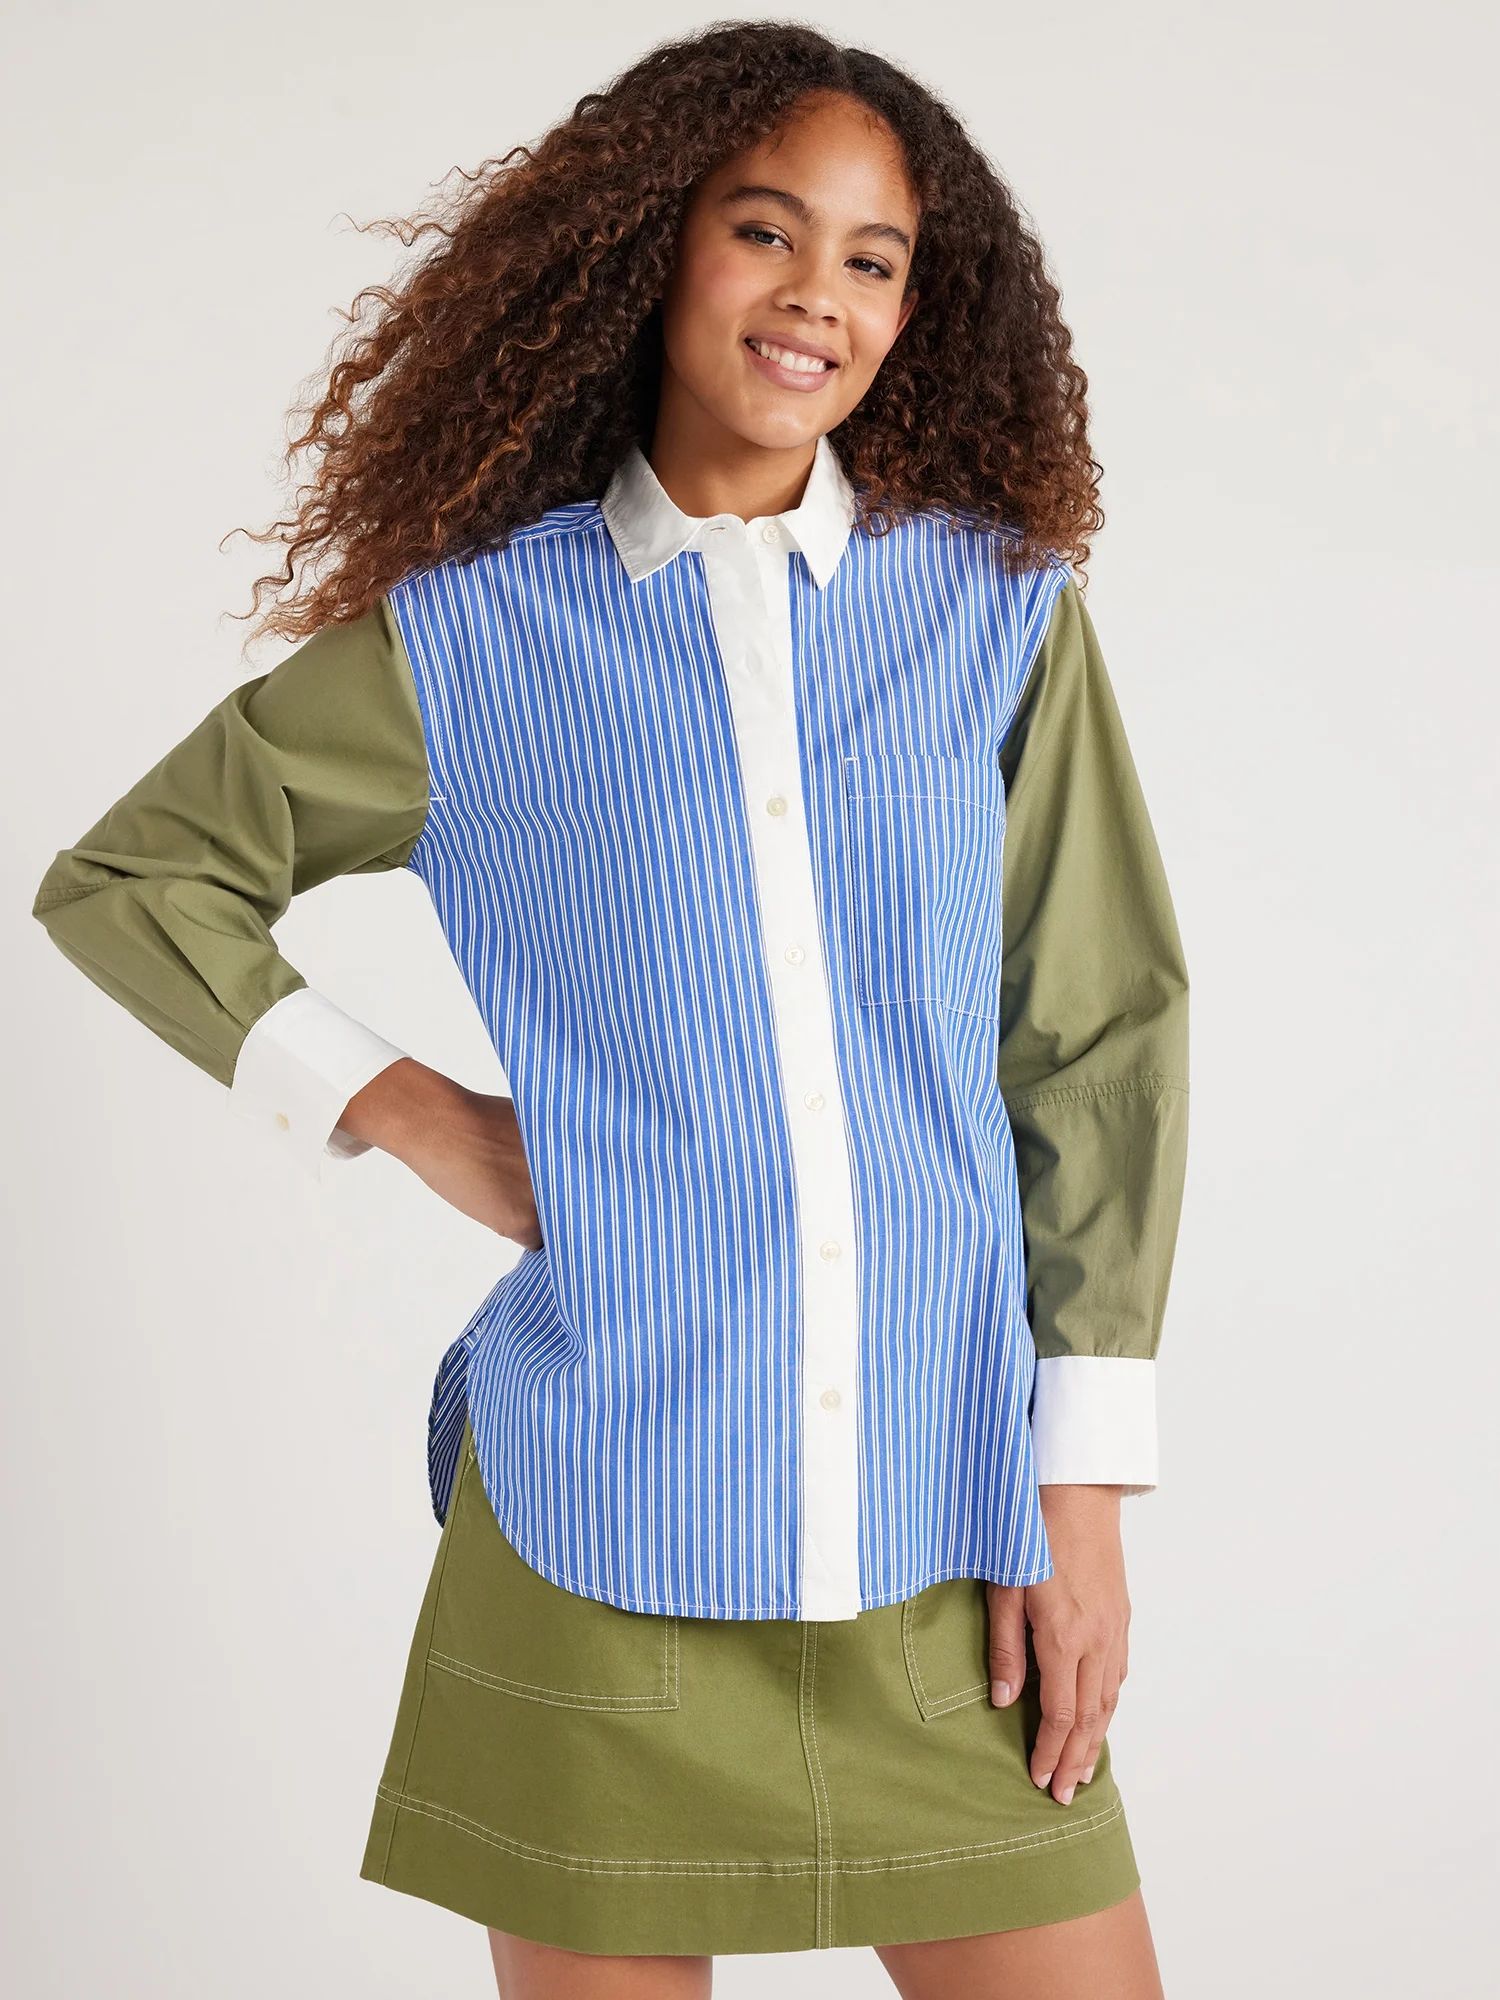 Free Assembly Women's Button Front Boxy Tunic Shirt with Long Sleeves, Sizes XS-XXL | Walmart (US)